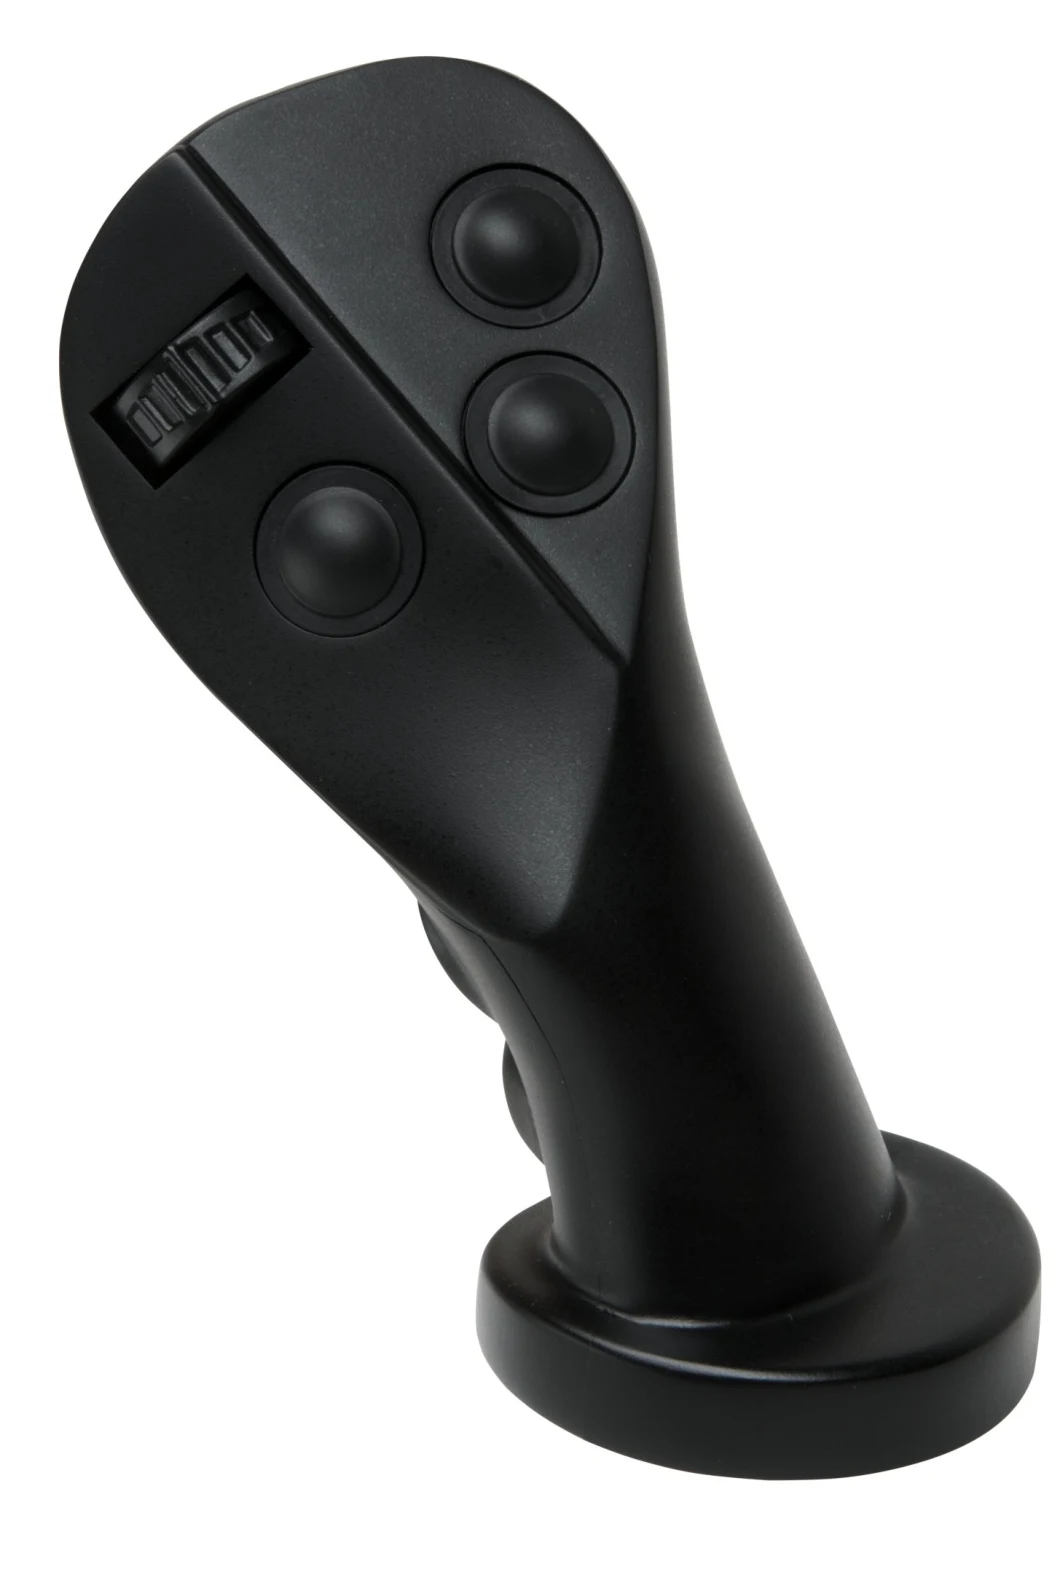 Joystick Wireless Long Range Industrial Remote Control for Crawler Tractor From Sweden